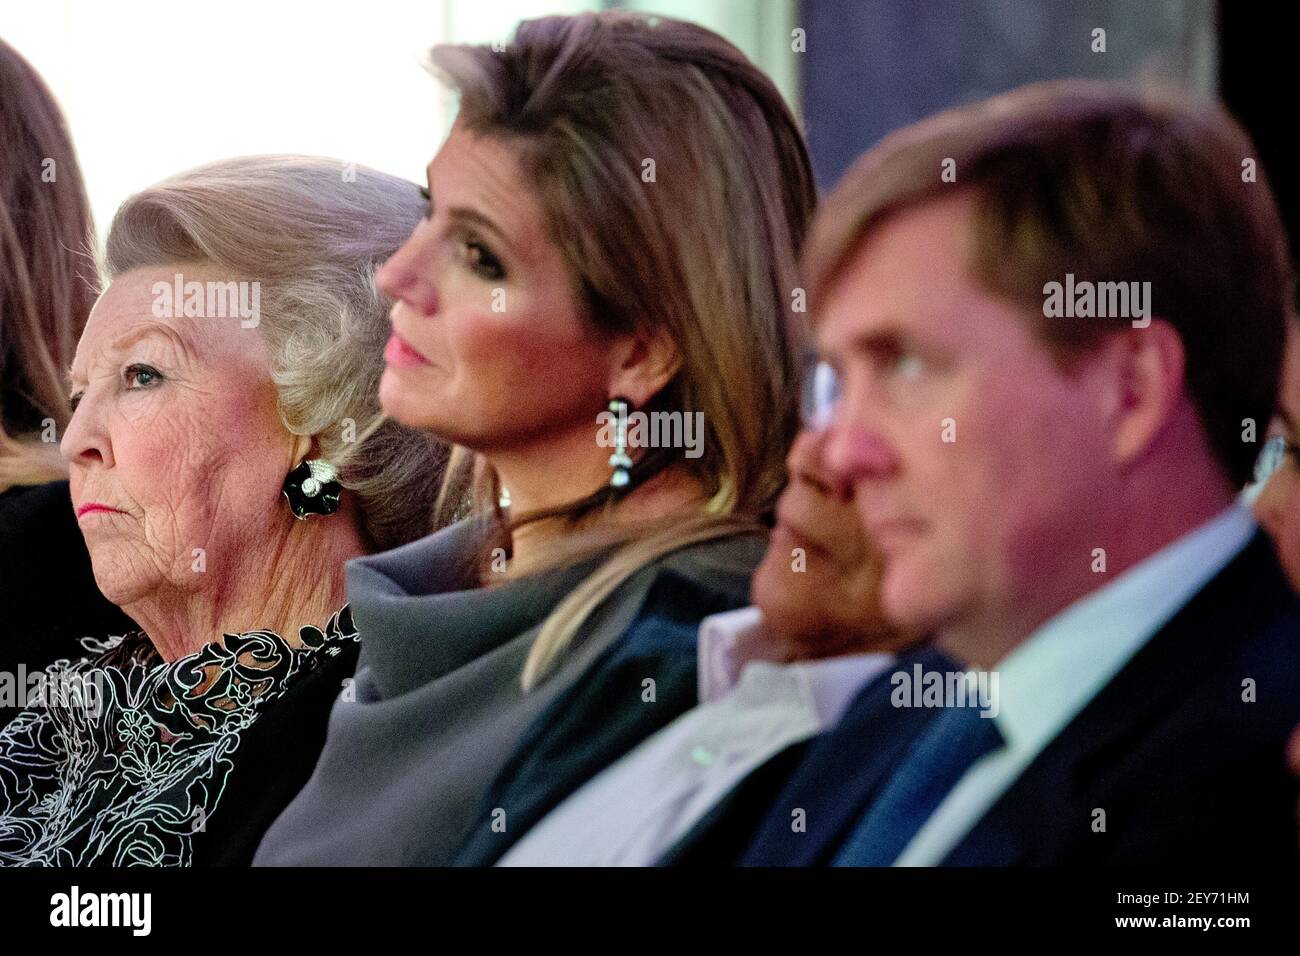 10-12-2014 AMSTERDAM - King Willem-Alexander, Queen Maxima, Princess Beatrix, Princess Mabel attend the award ceremony of the Prince Claus Prize 2014 to Columbian artist and plant expert Abel RodrÃguez at the Royal Palace in Amsterdam (Photo by Robin Utrecht/Sipa USA) Stock Photo